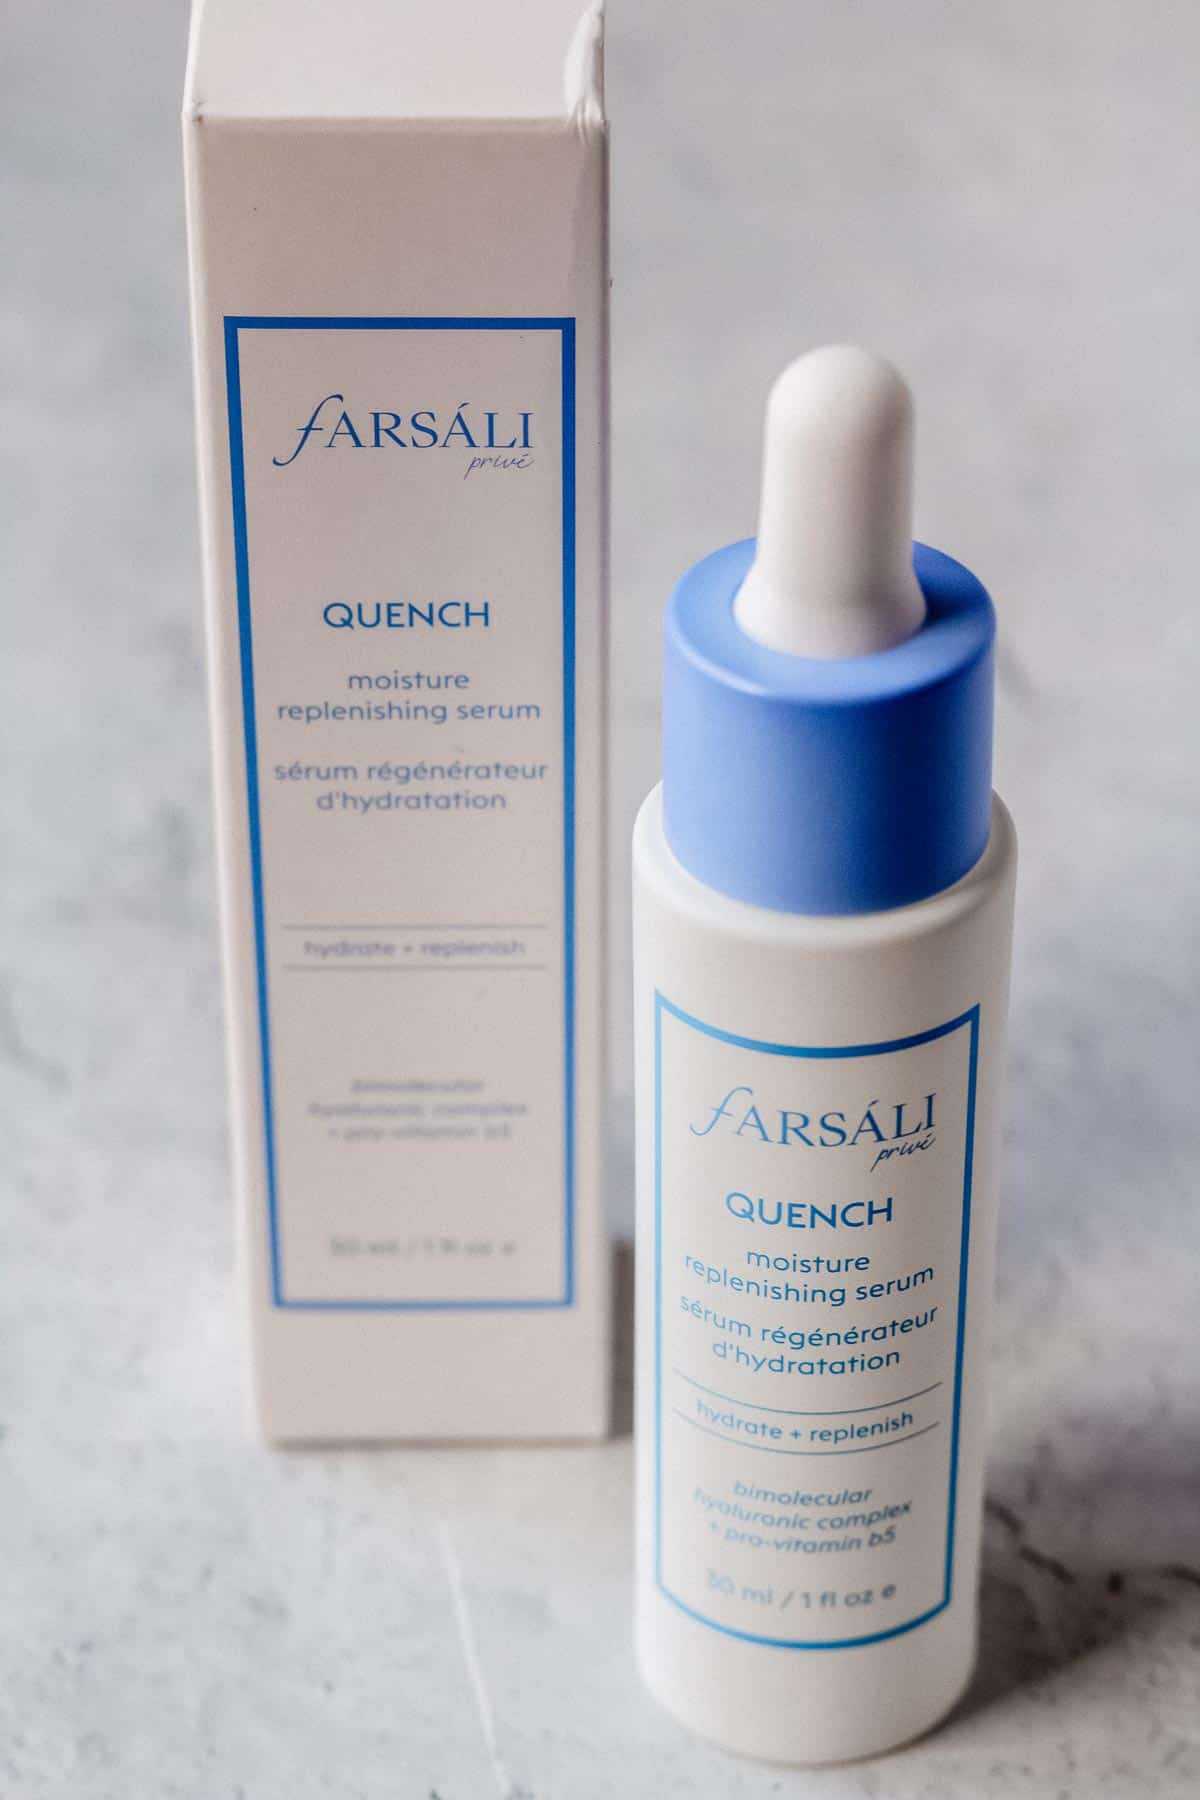 Farsali Prive Quench Moisture Replenishing Serum and it's box on a white background